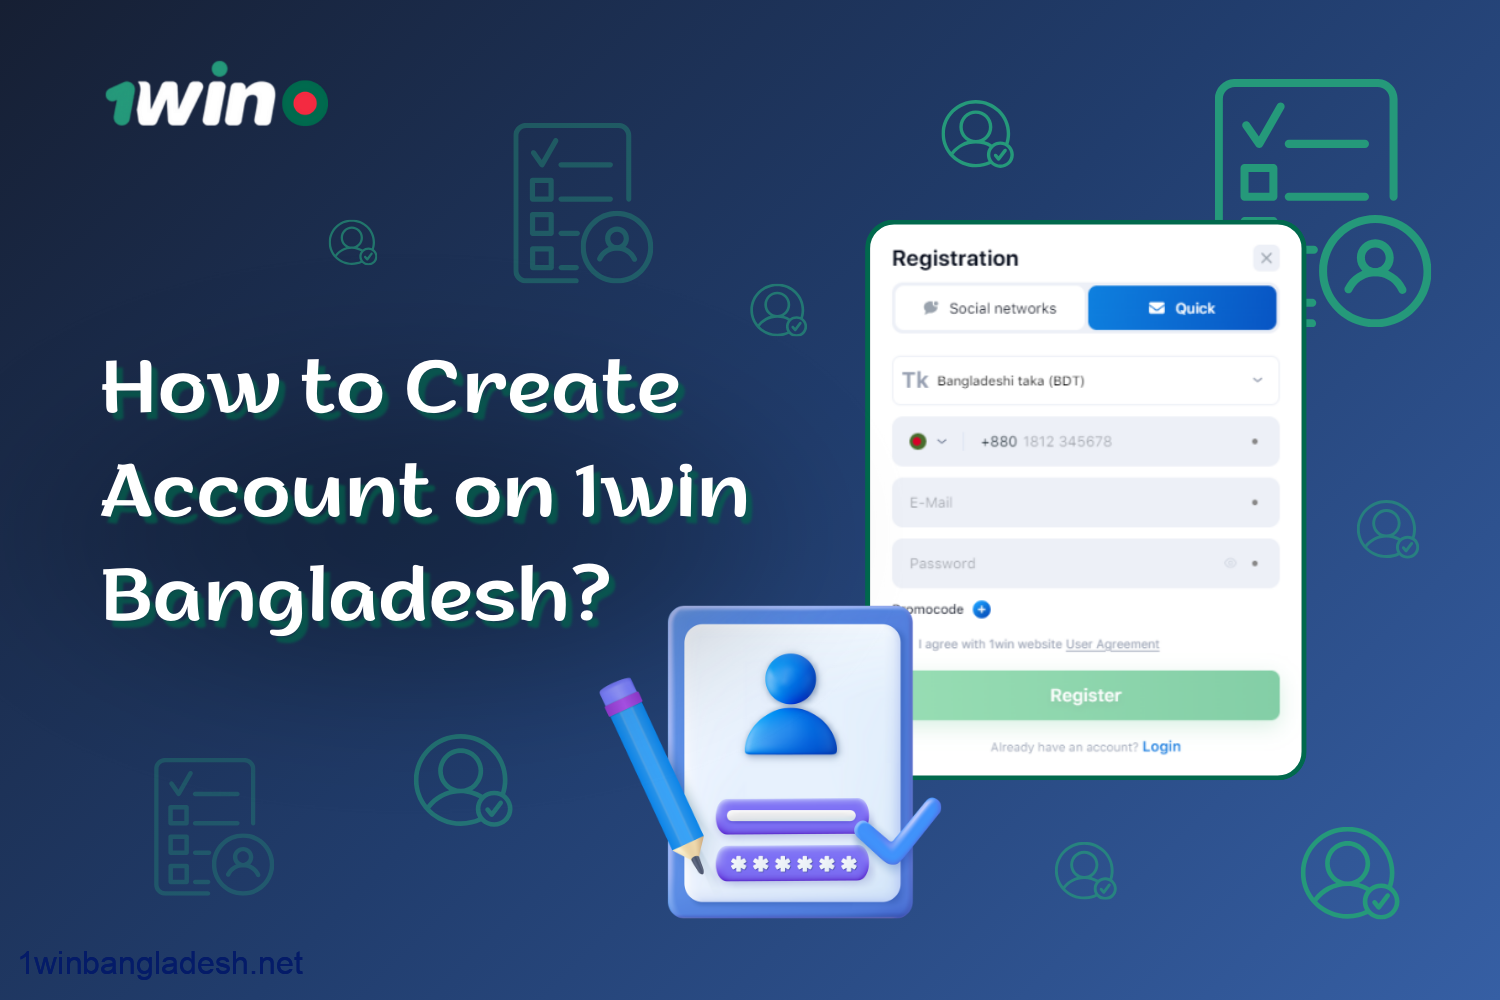 To create an account at 1win Bangladesh, you need to click on the registration button in the upper right corner of the site and follow the steps suggested